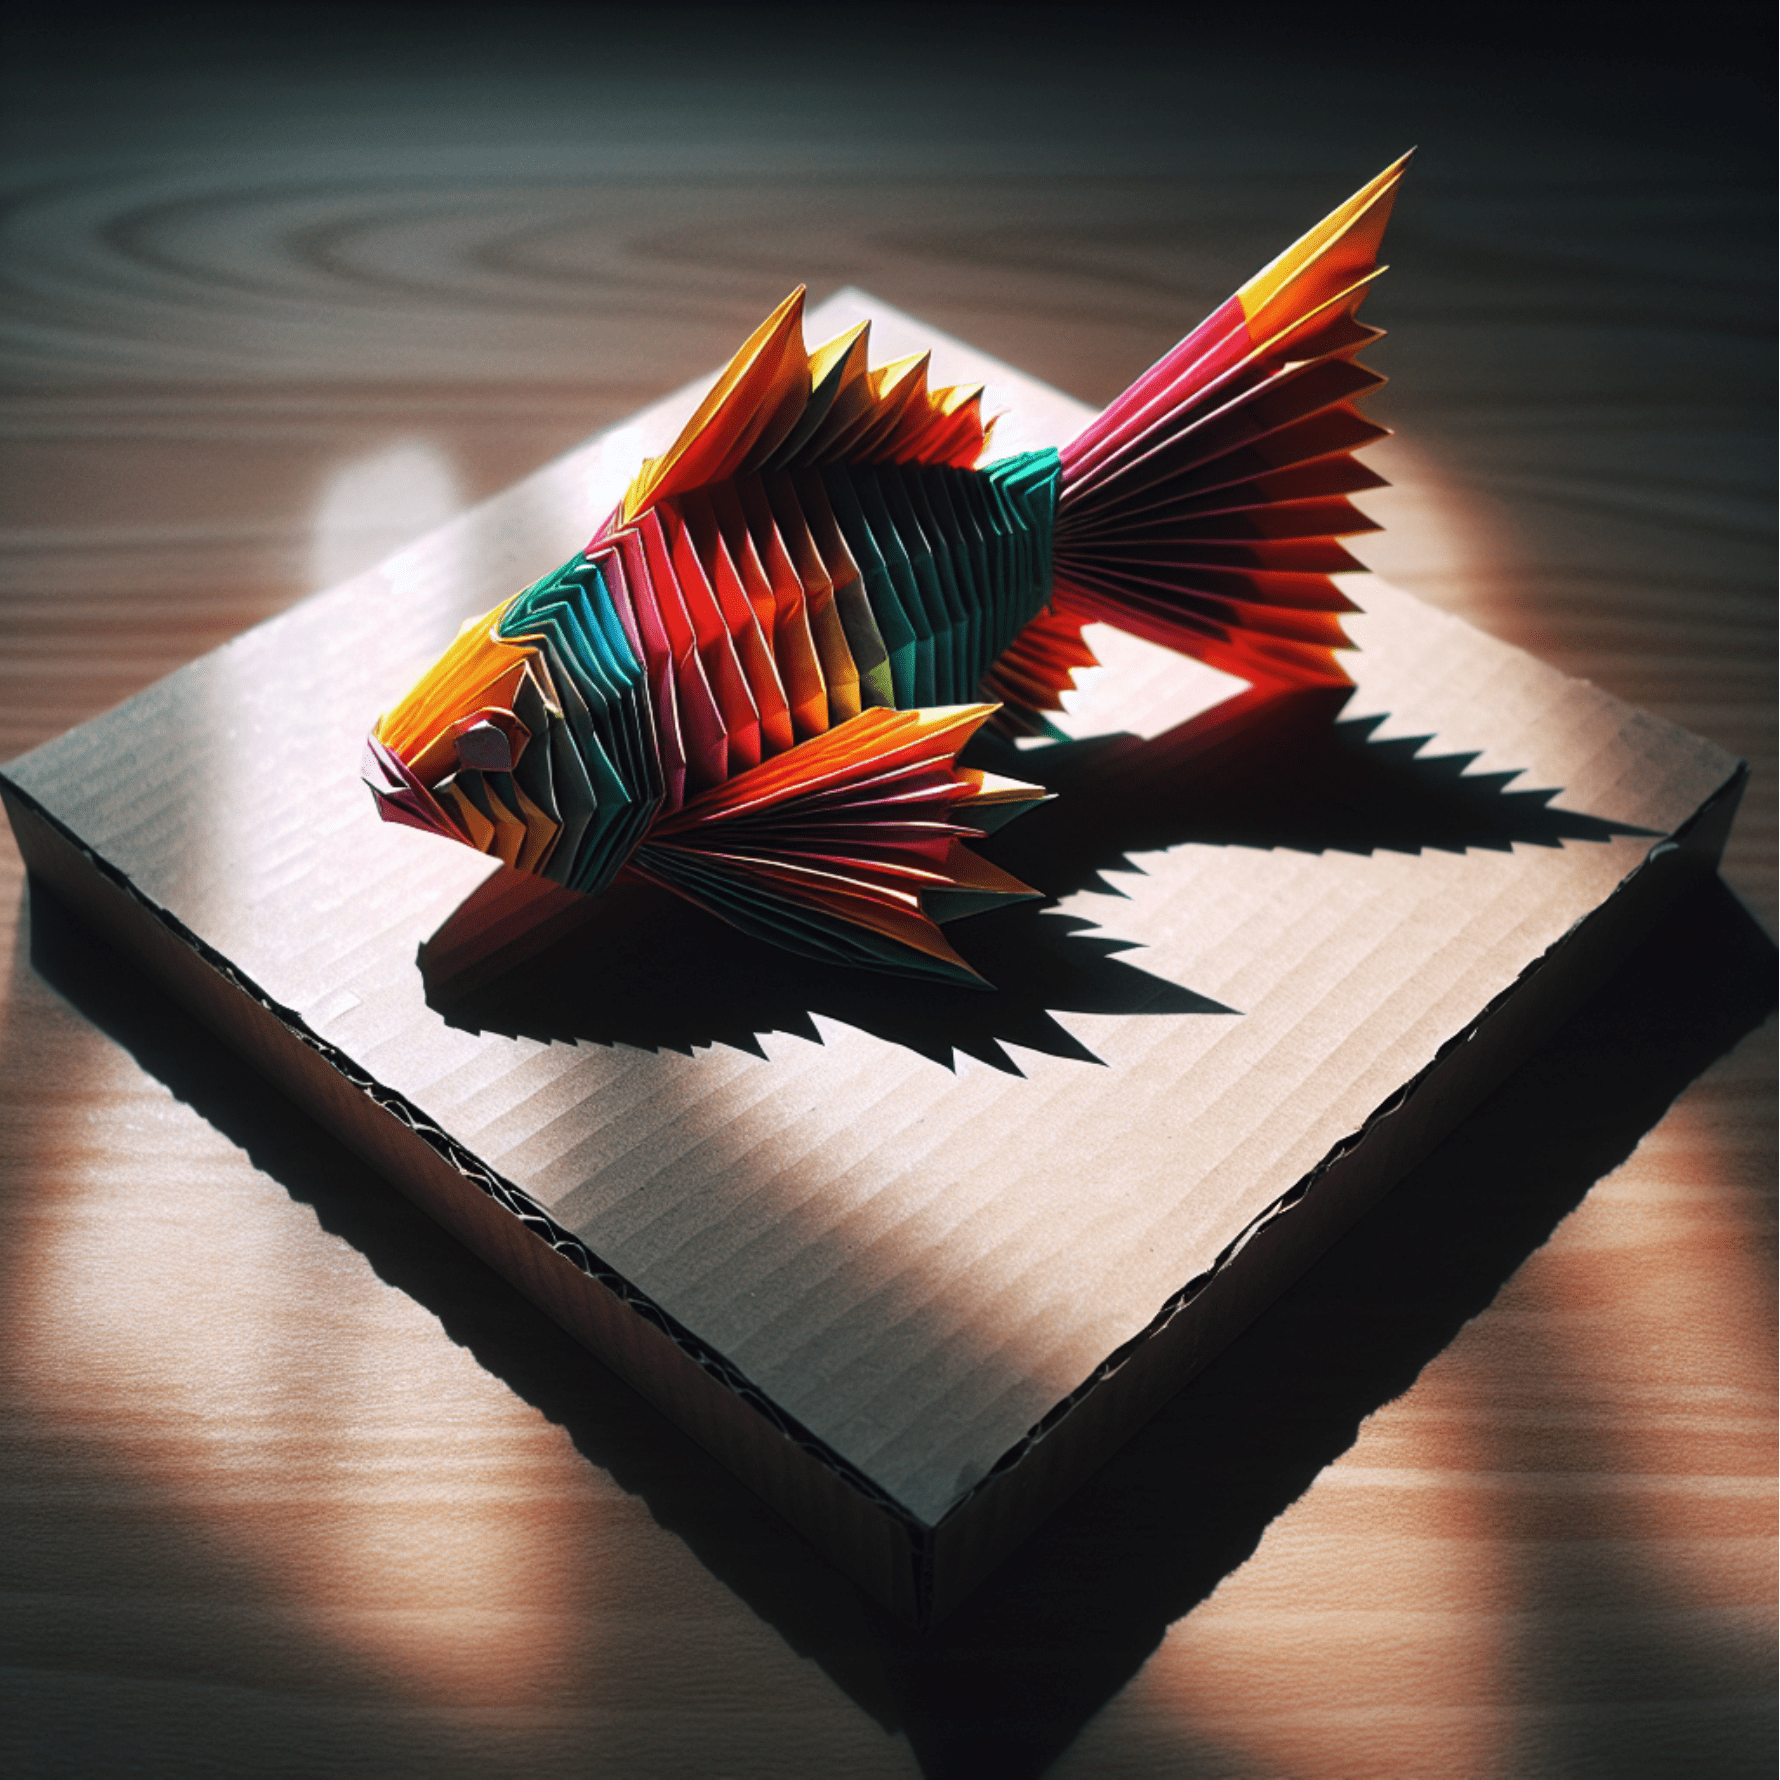 Origami wrapping of a fish, colored paper on top of cardboard, realistic.